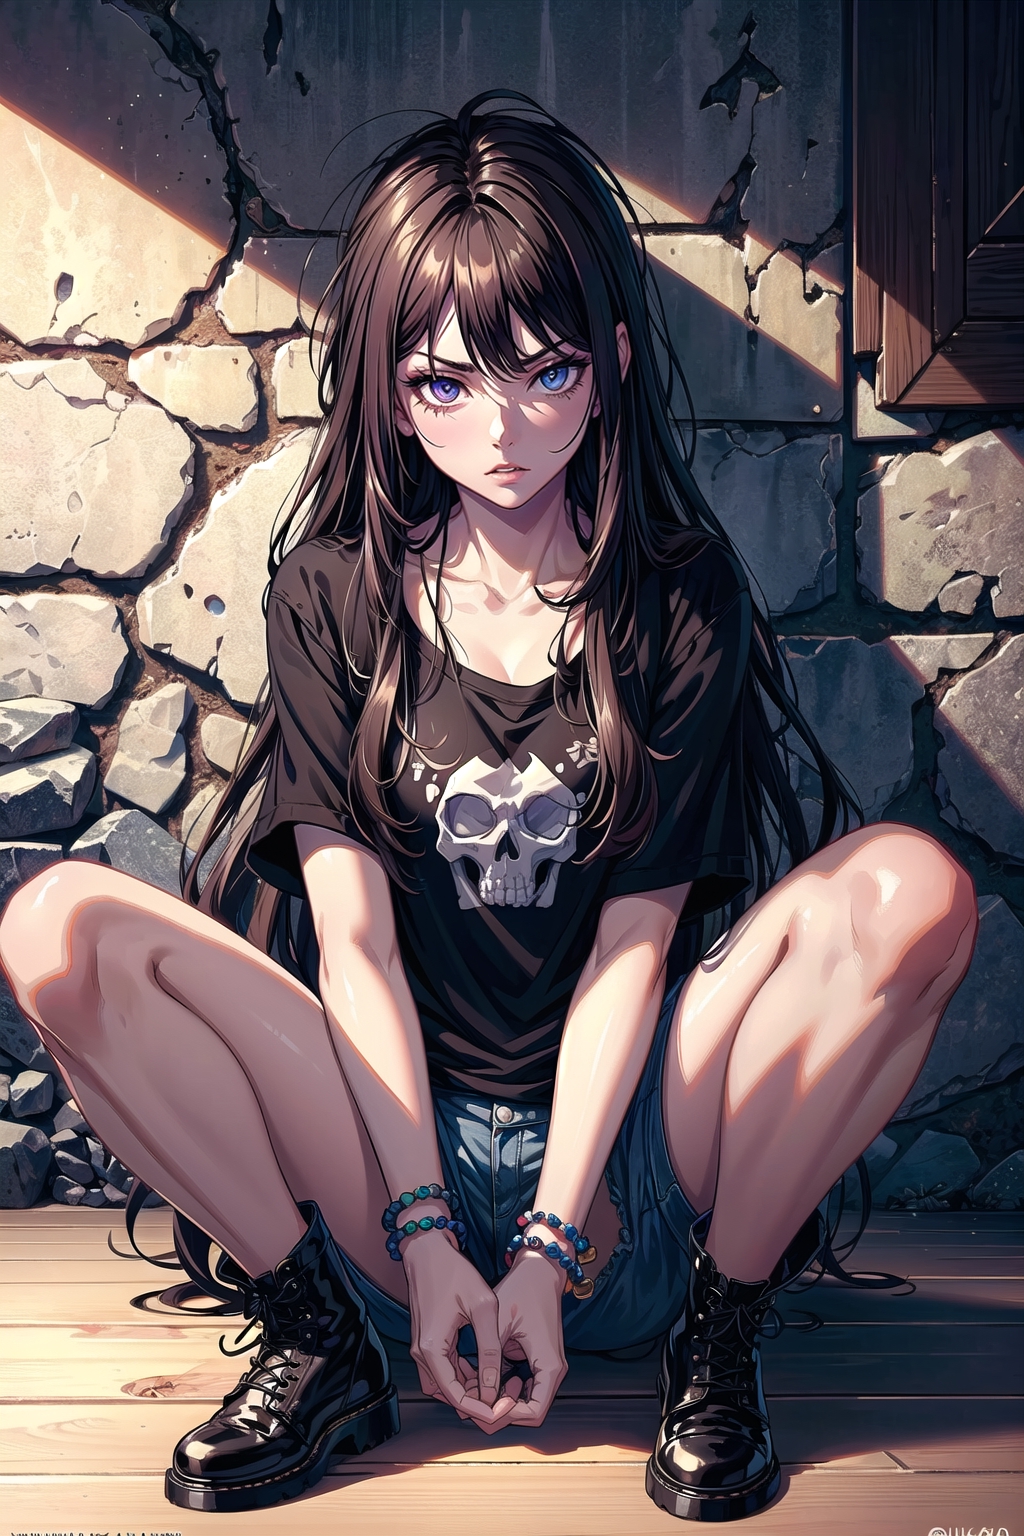 mad anime girl with brown hair